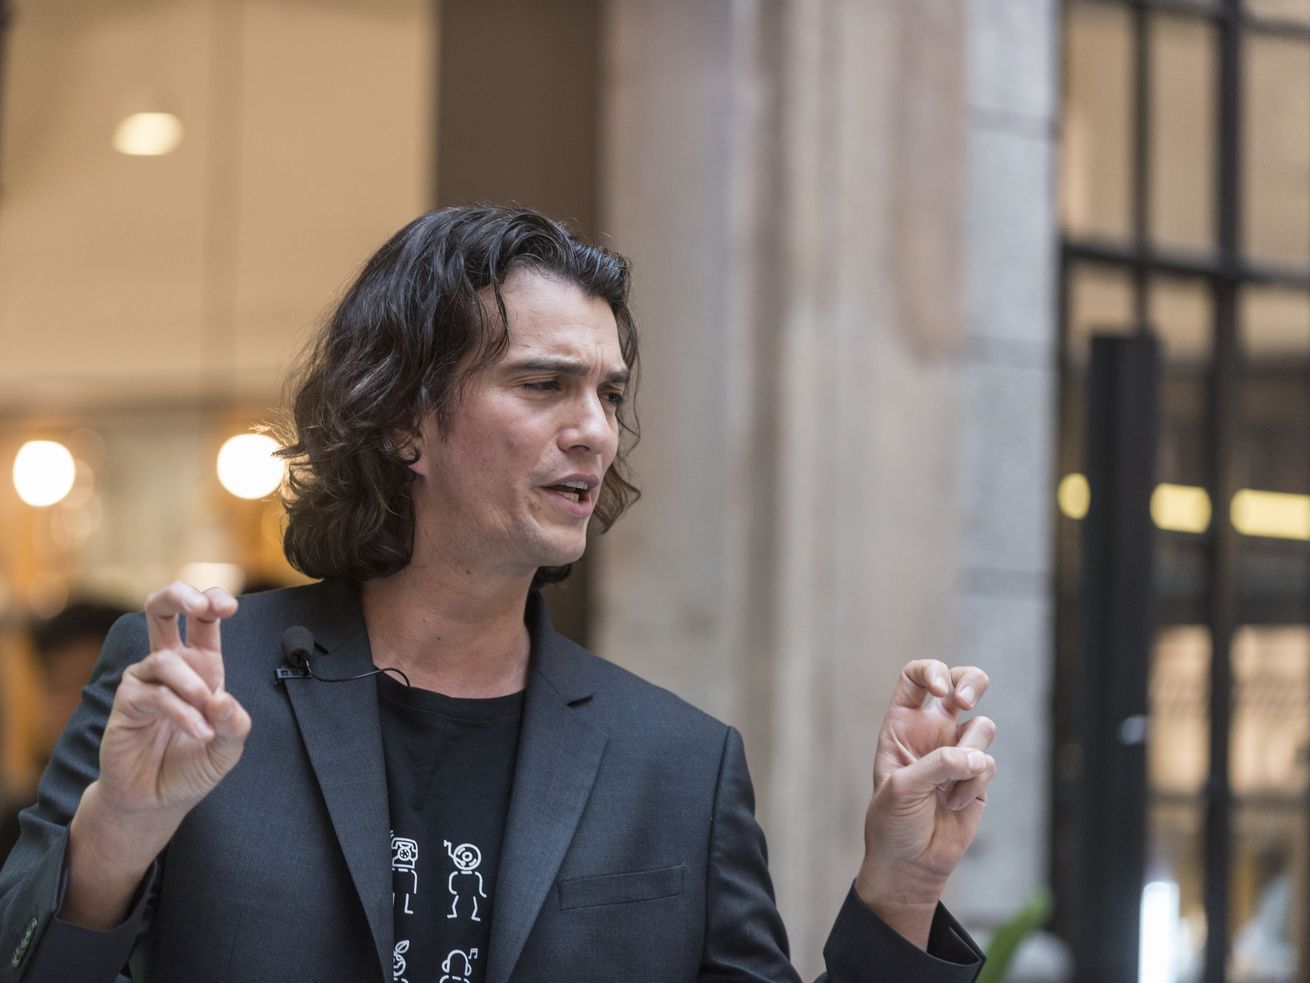 WeWork co-founder Adam Neumann’s new crypto project sounds like a scam within a scam